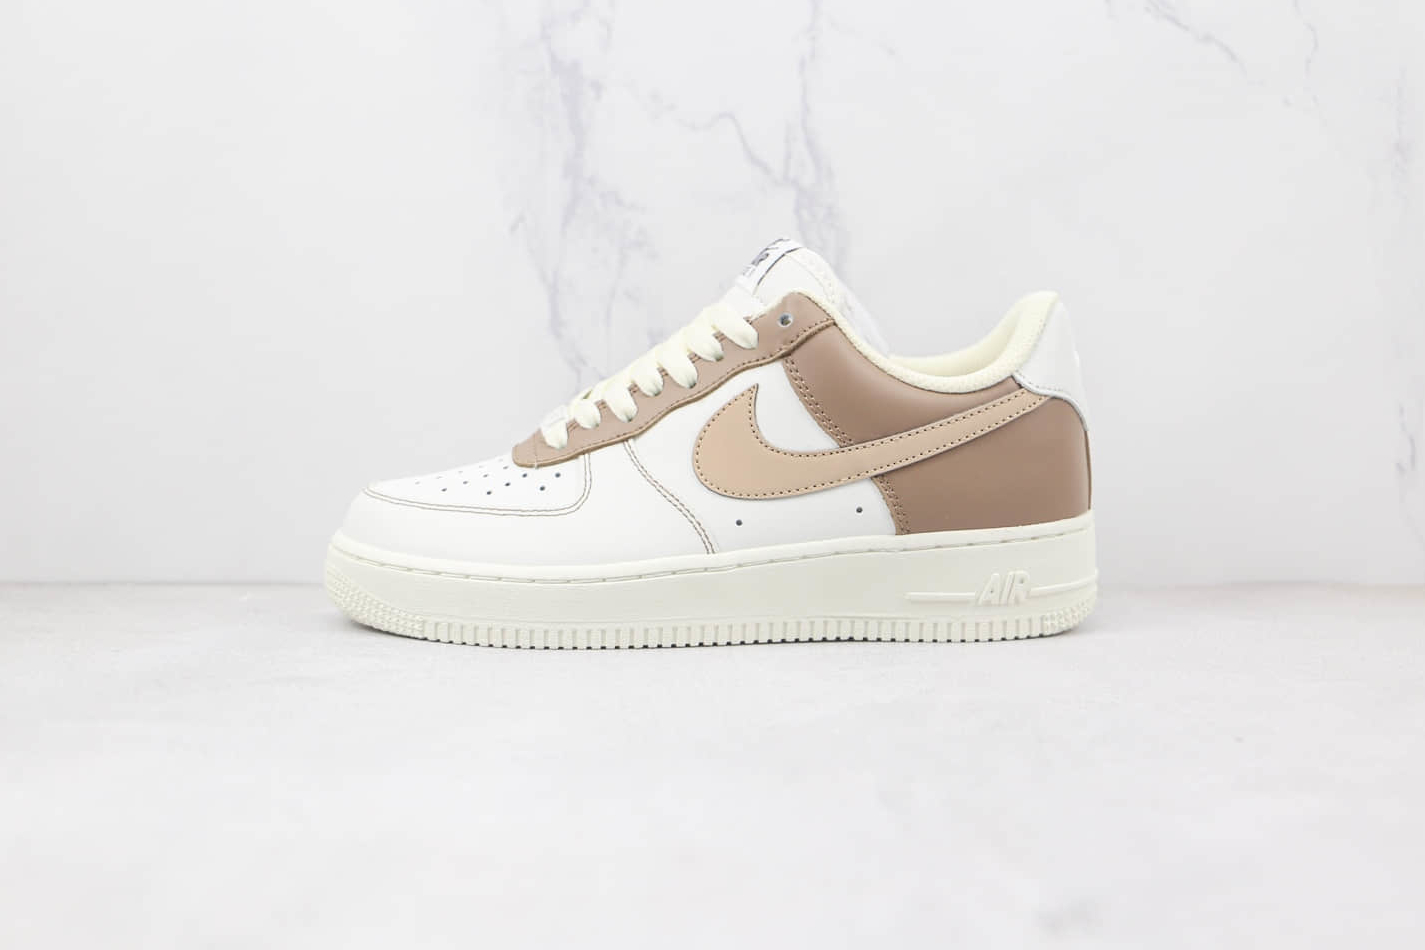 Nike Air Force 1 07 Low Mikhaki Summite White Shoes - DT0226-303 | Stylish and Versatile Footwear